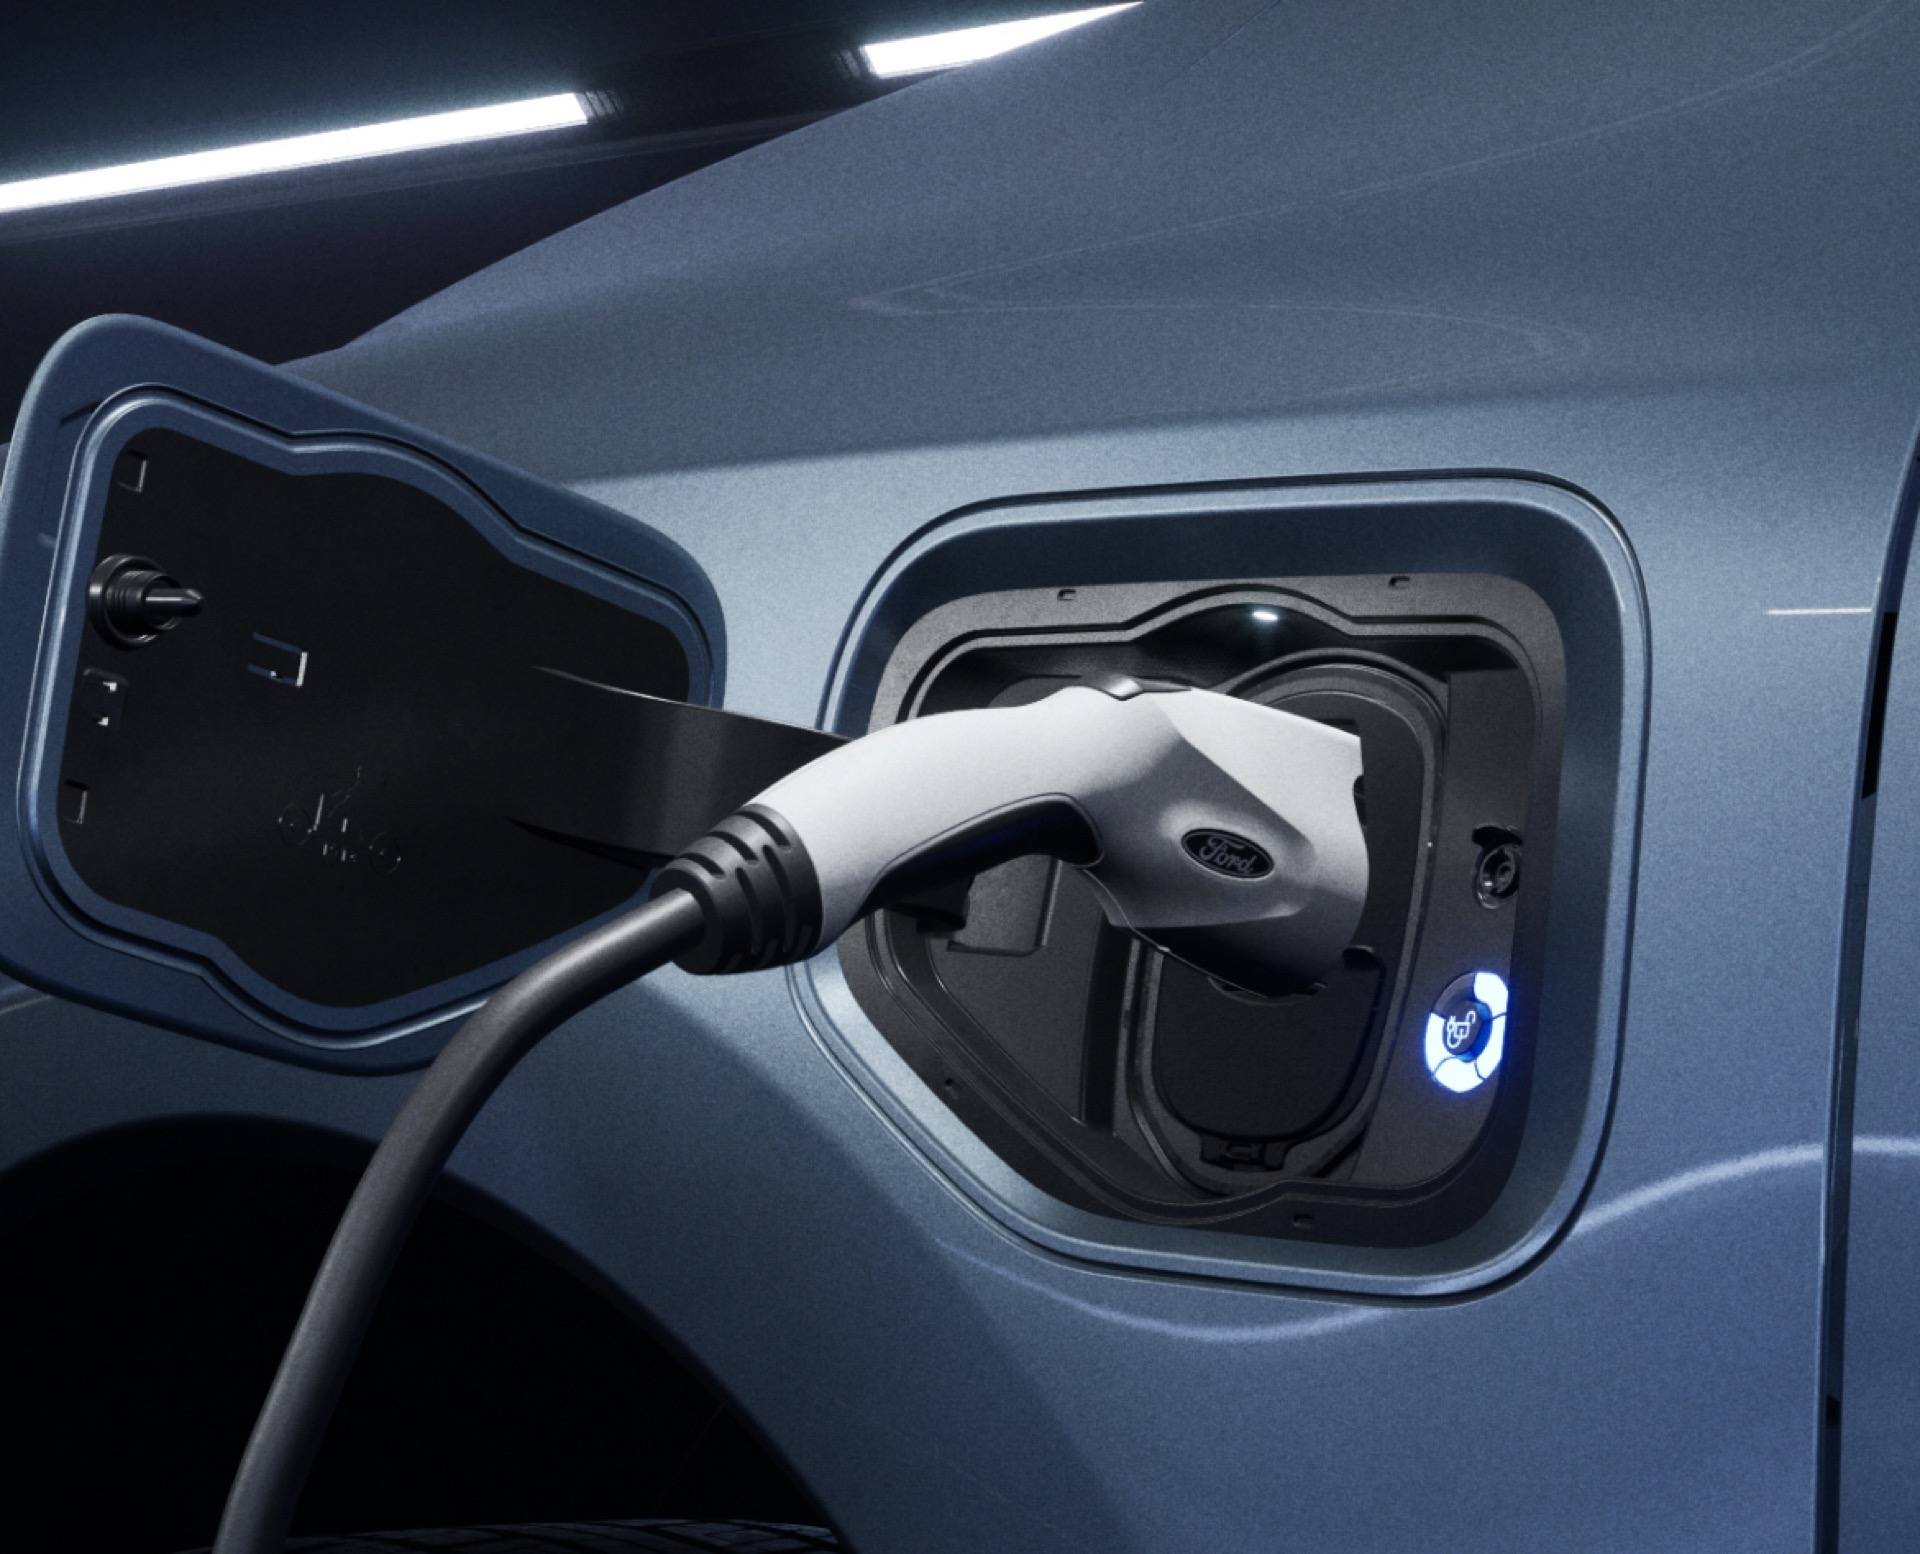 Cooler means quicker: How EV fast-charging stops might get shorter without bulkier cablesCooler means quicker: How EV fast-charging stops might get shorter without bulkier cables